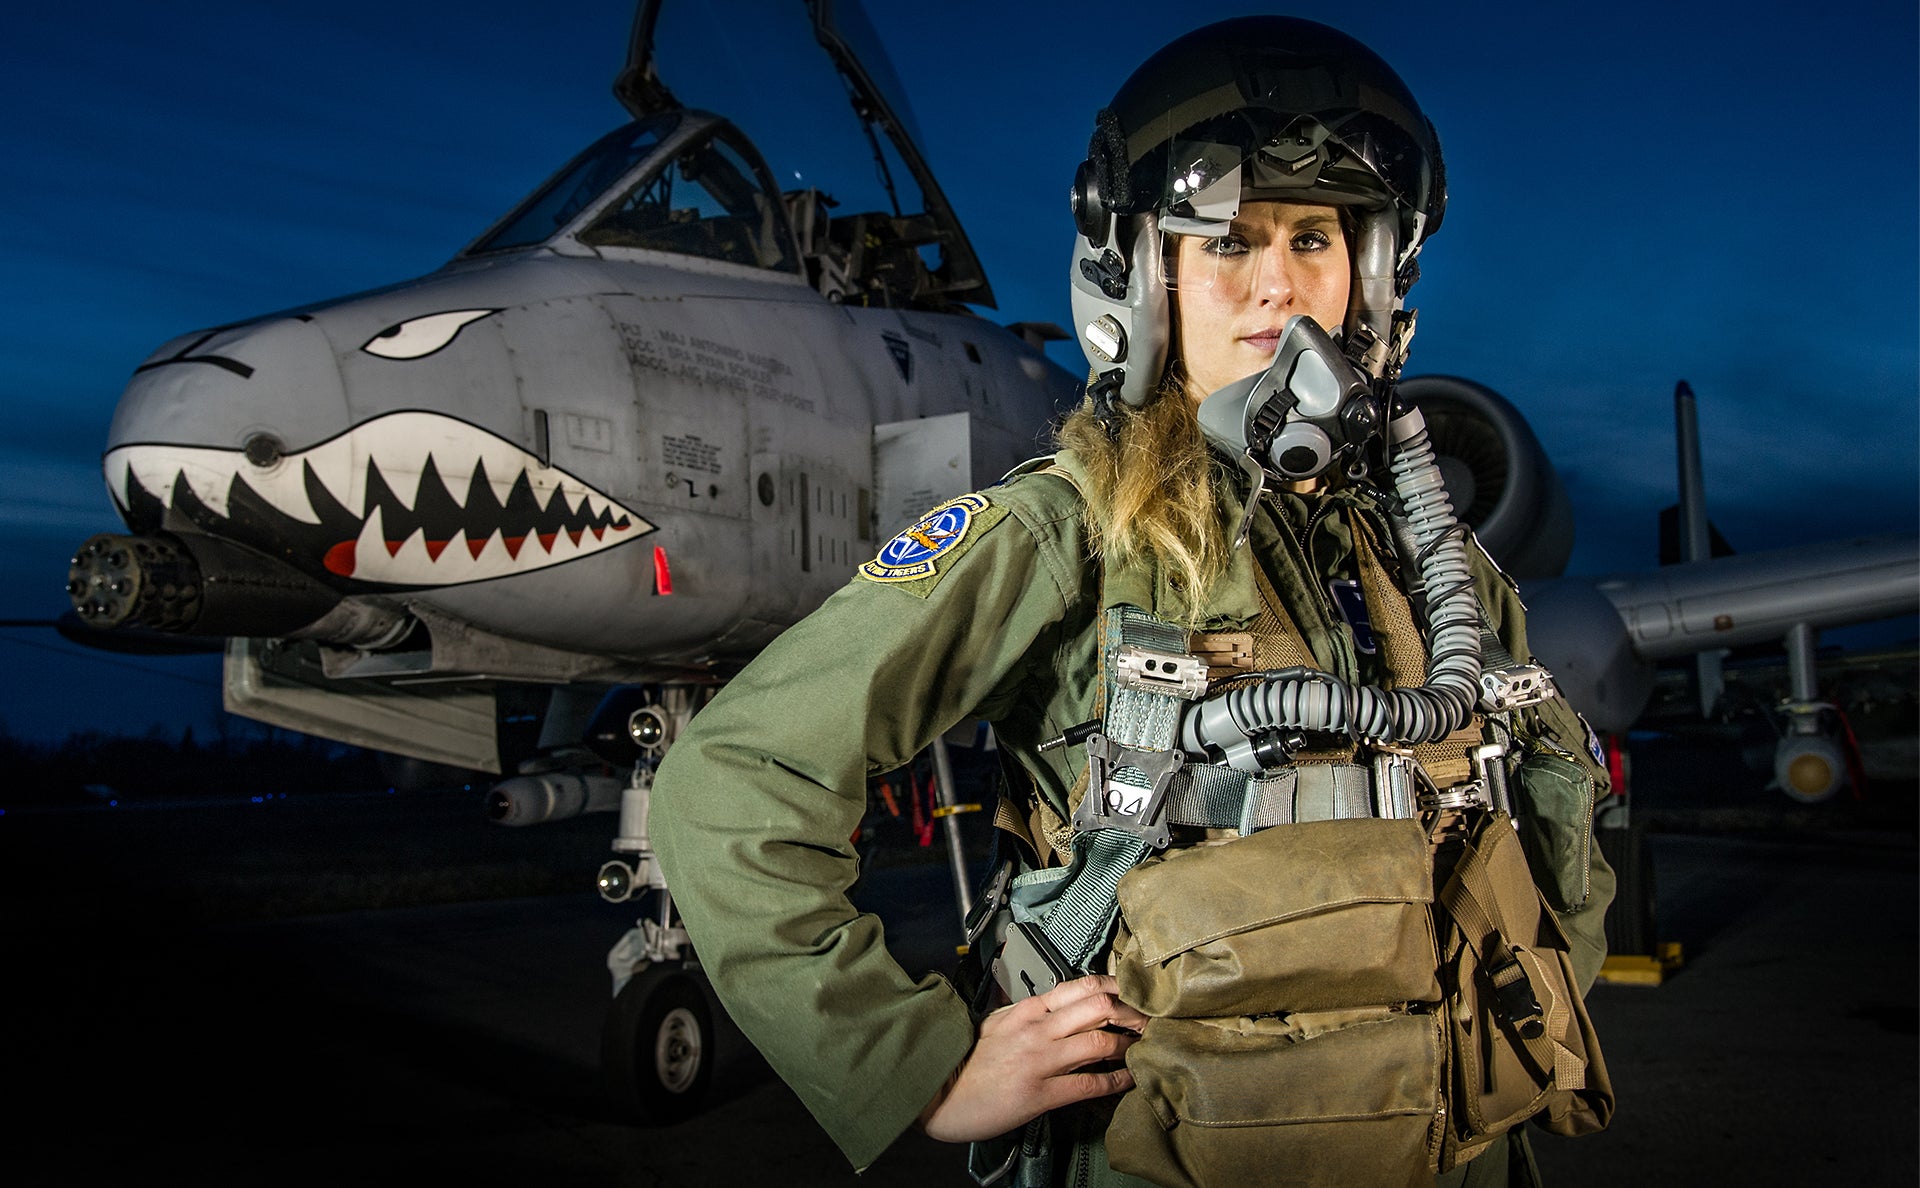 How a Small-Town Girl Ended Up in the Cockpit of an A-10 Warthog